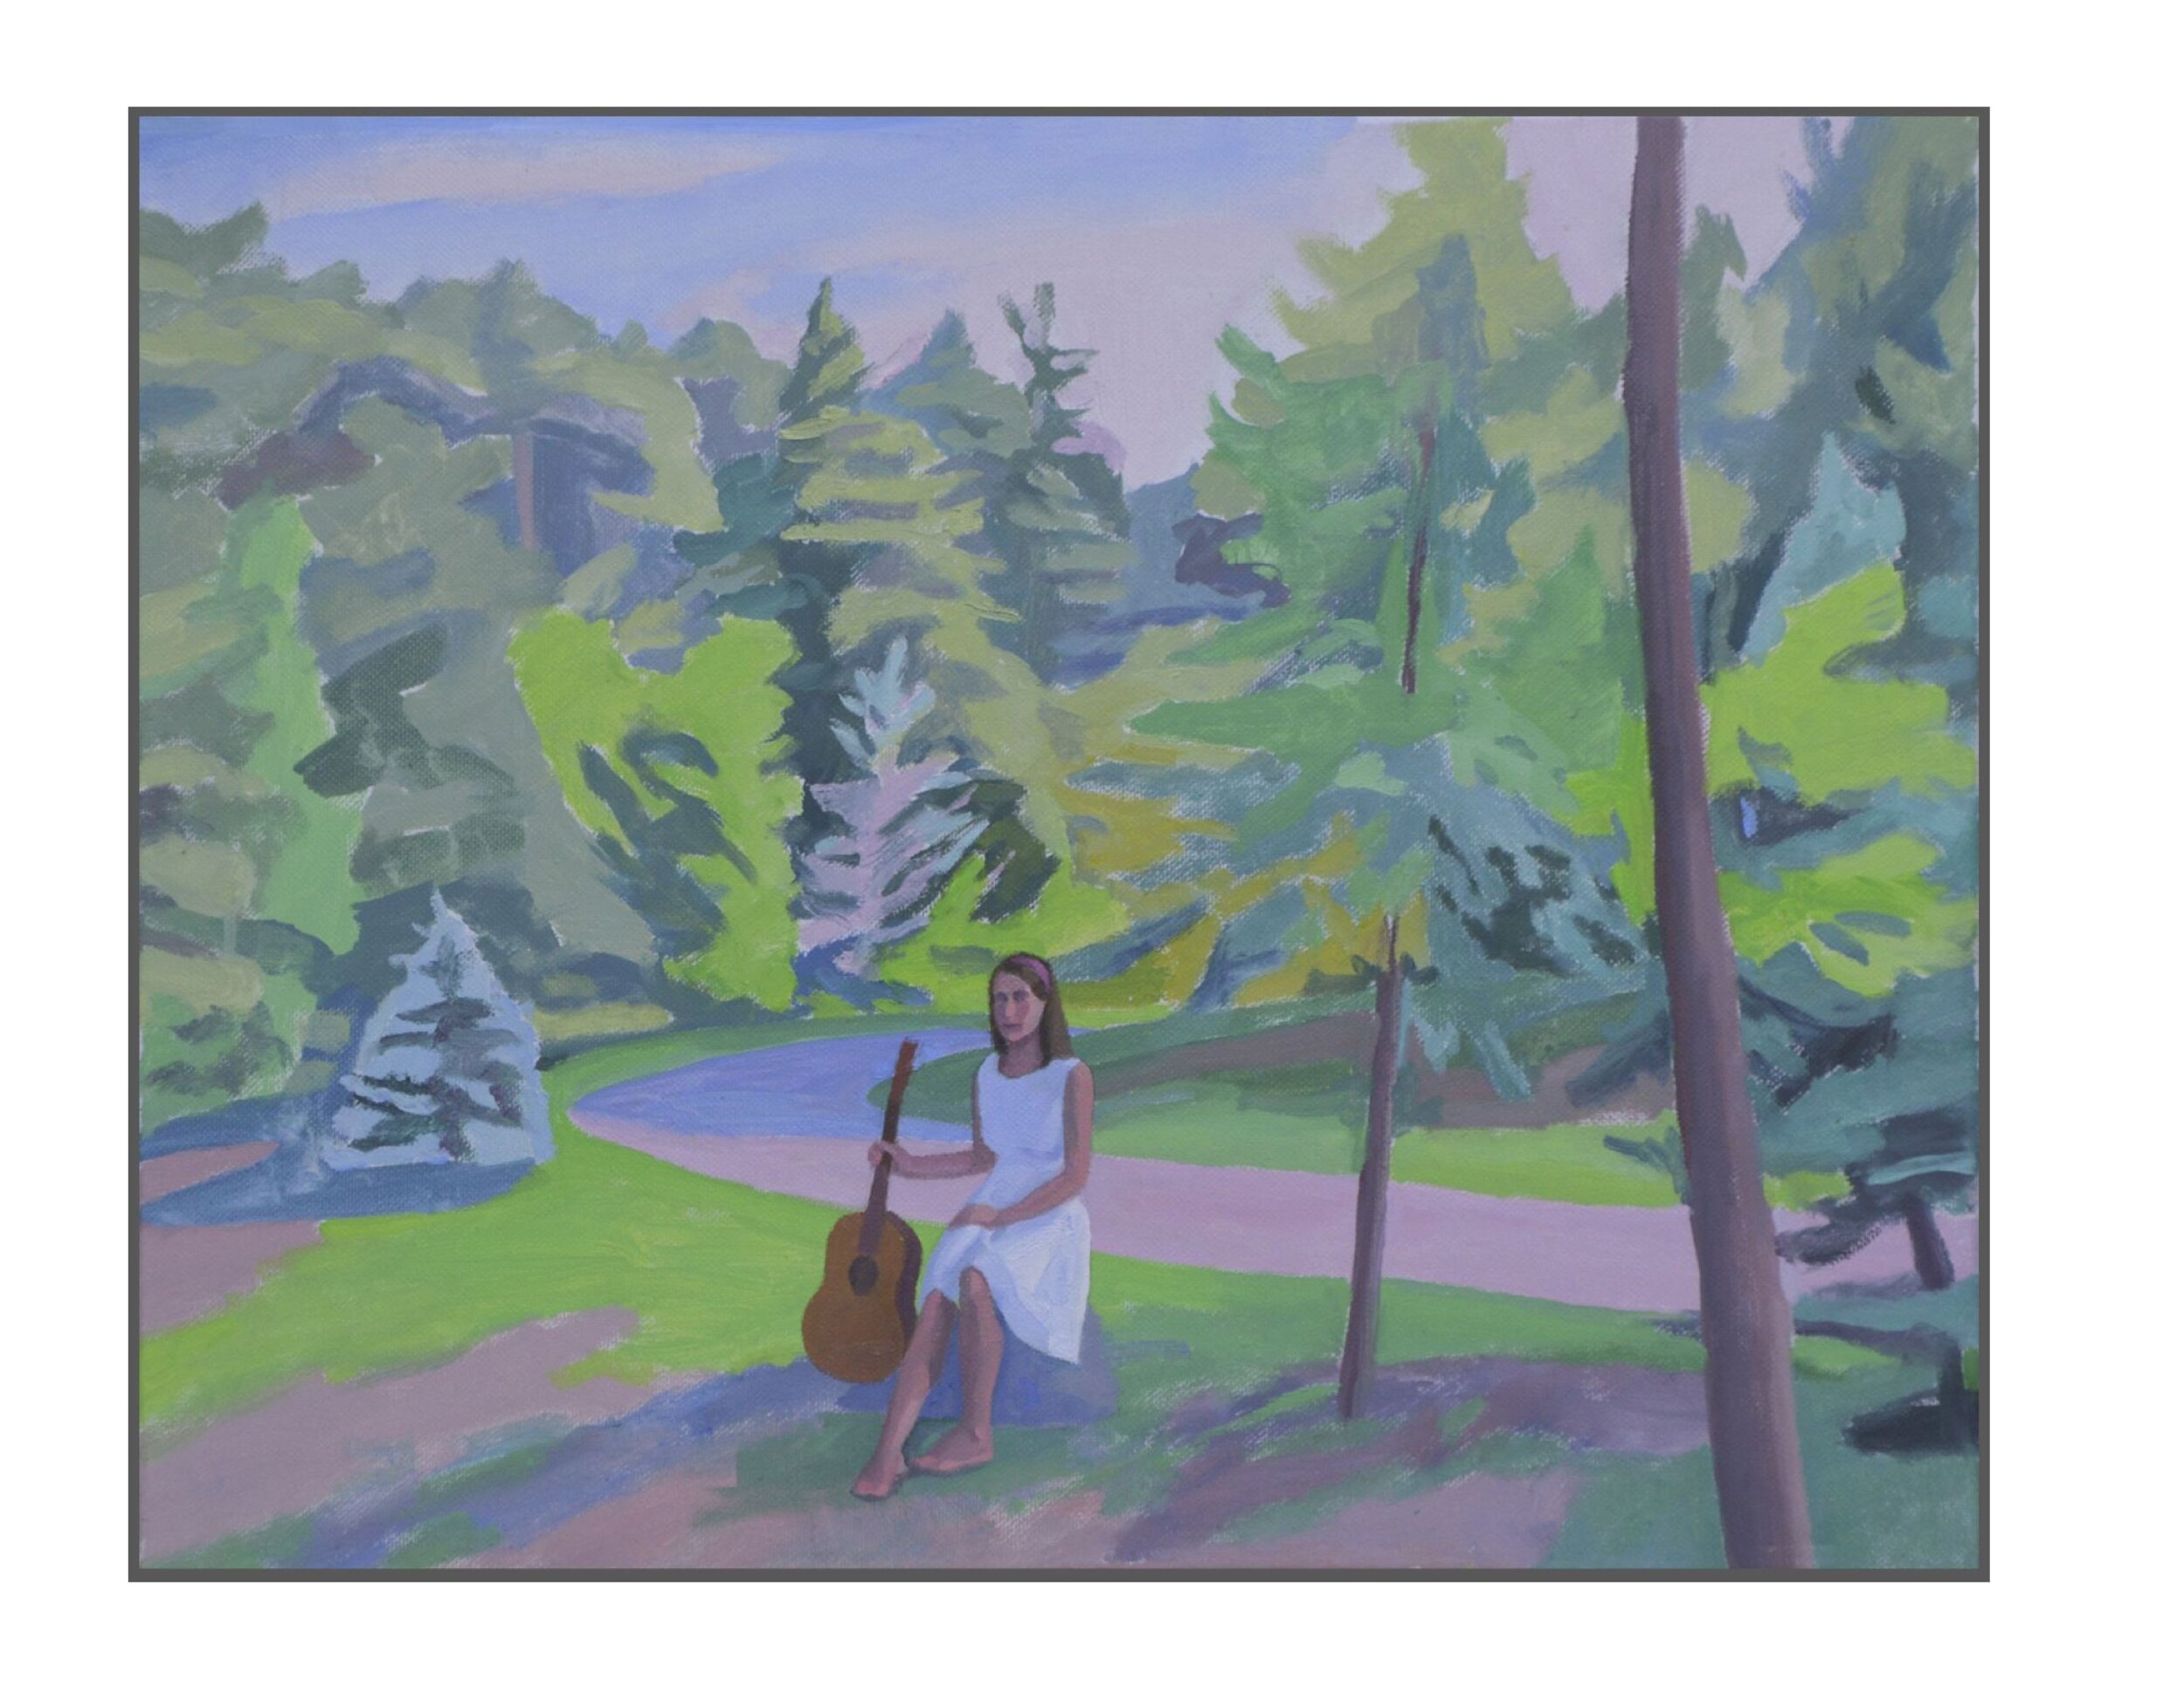 Guitarist in Highland Park, oil/canvas, 16 x 20 inches